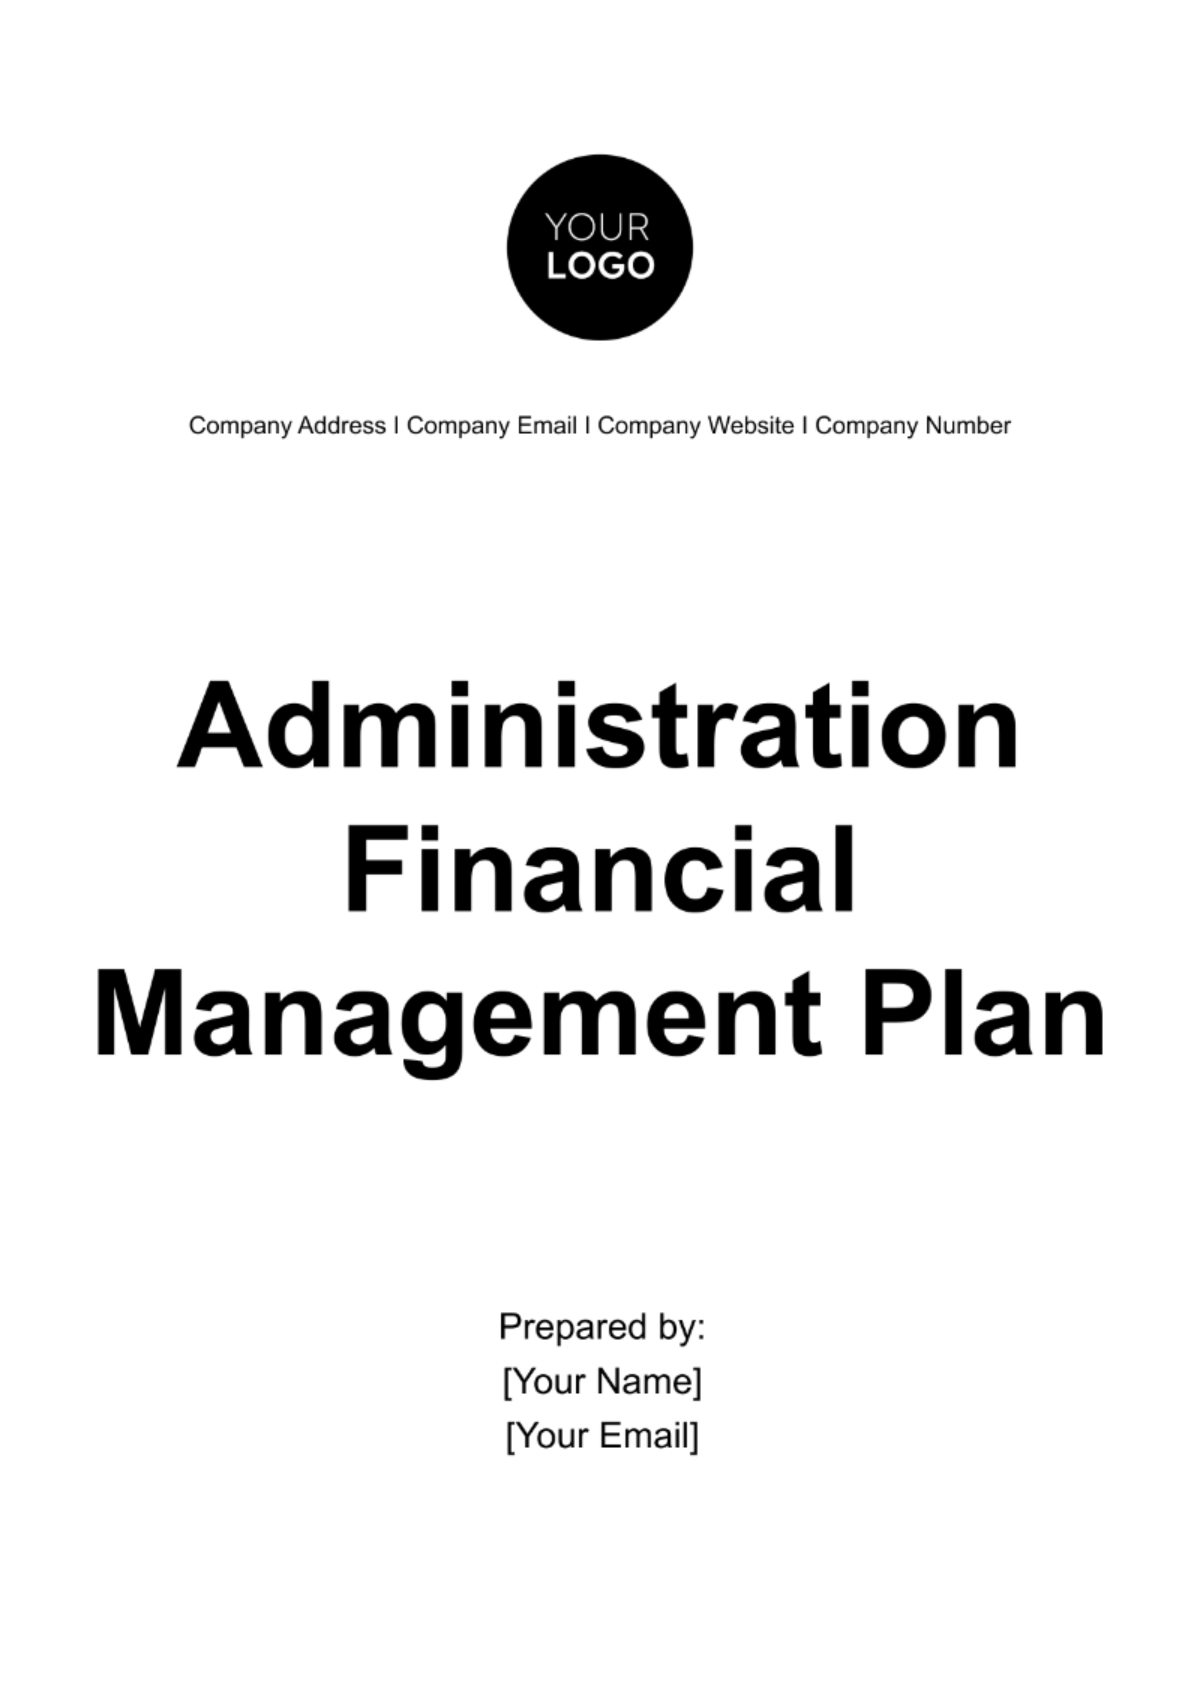 Free Administration Financial Management Plan Template